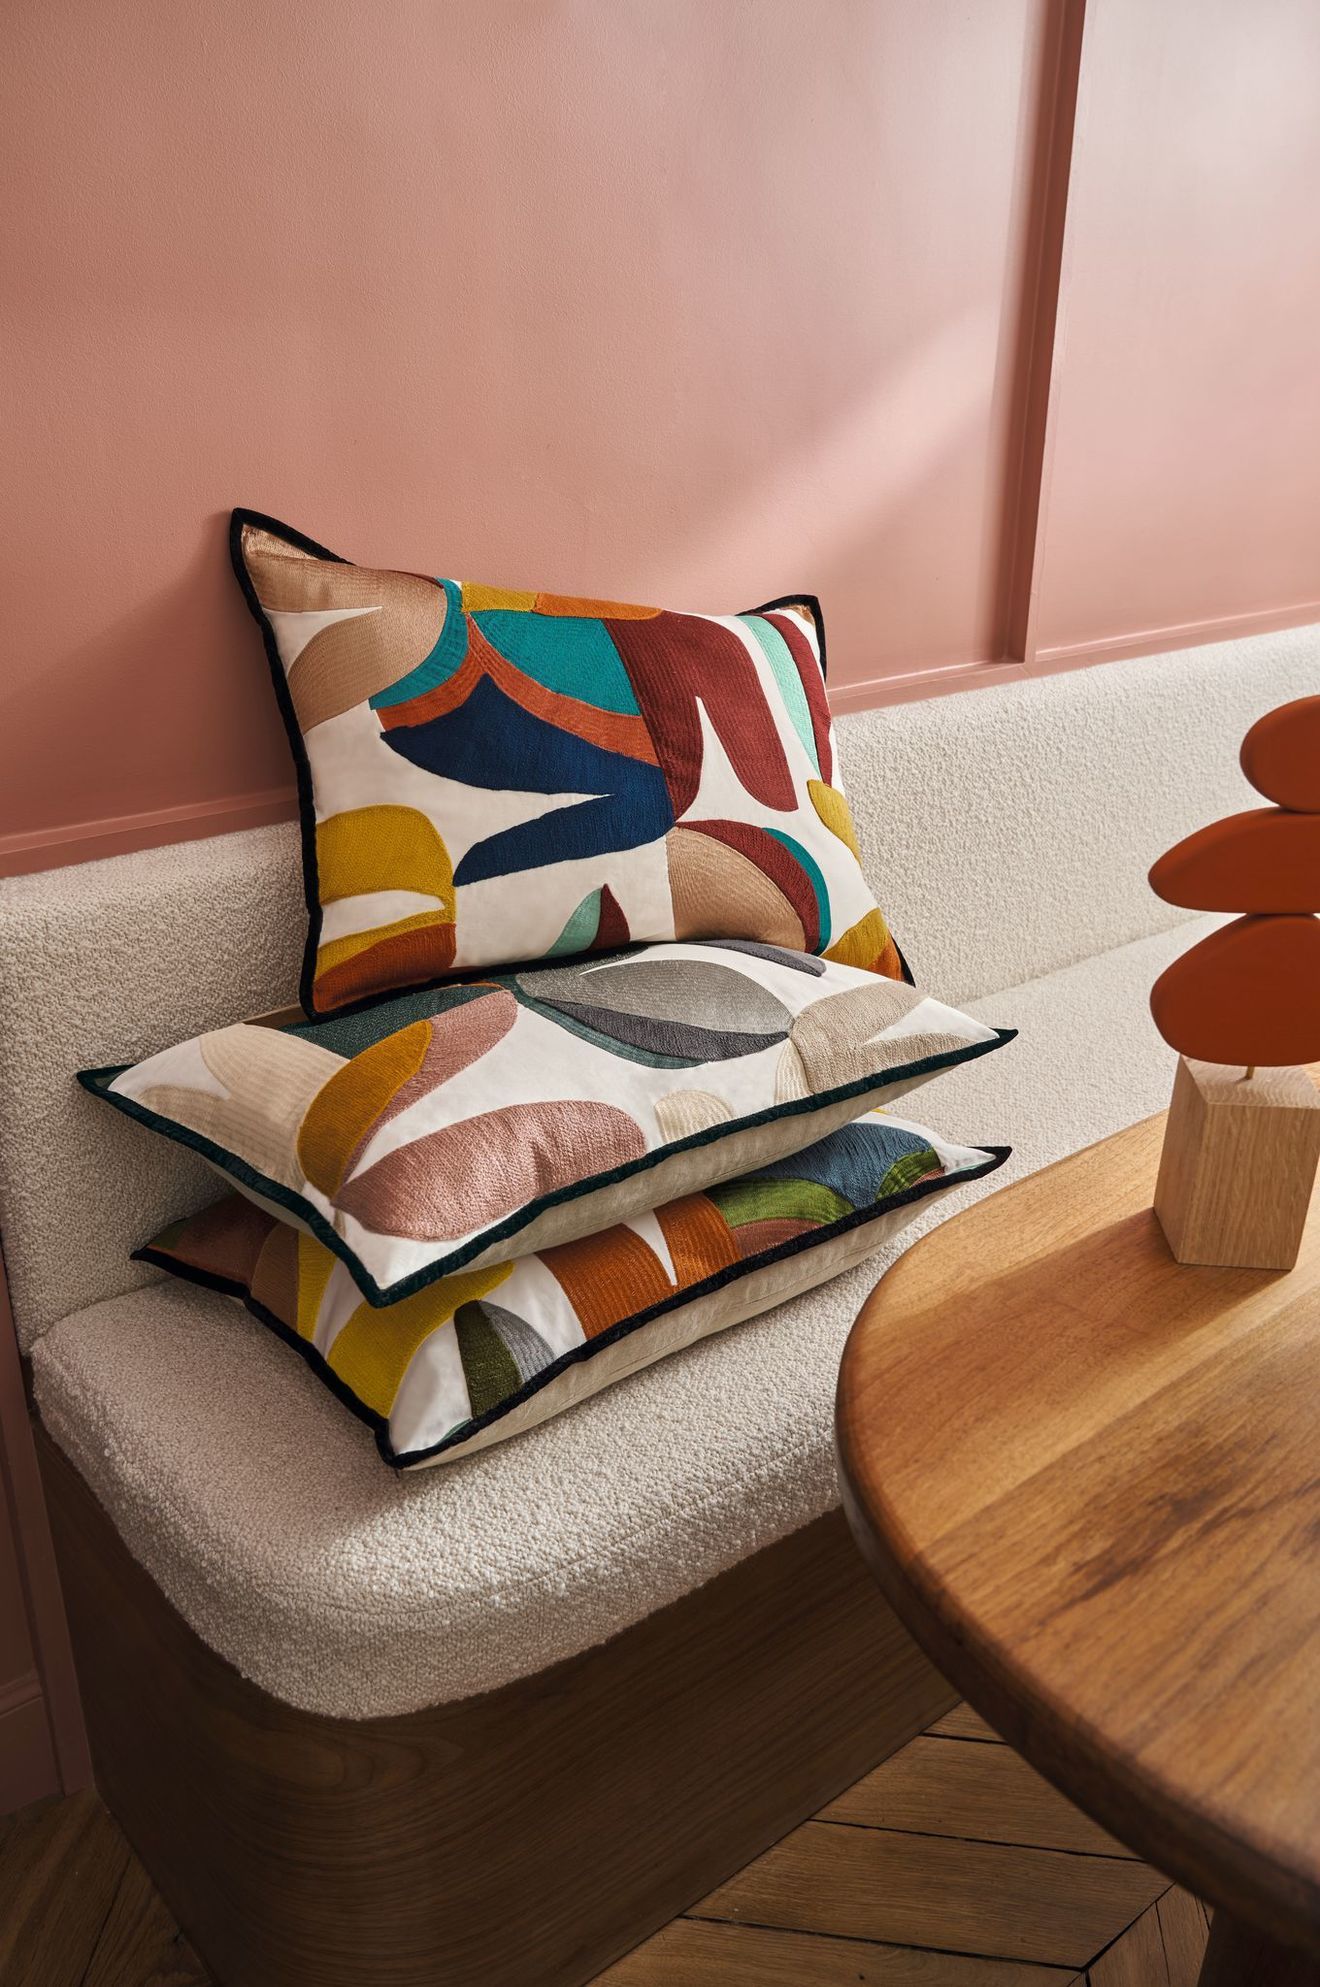 Splash colours with outdoor cushions